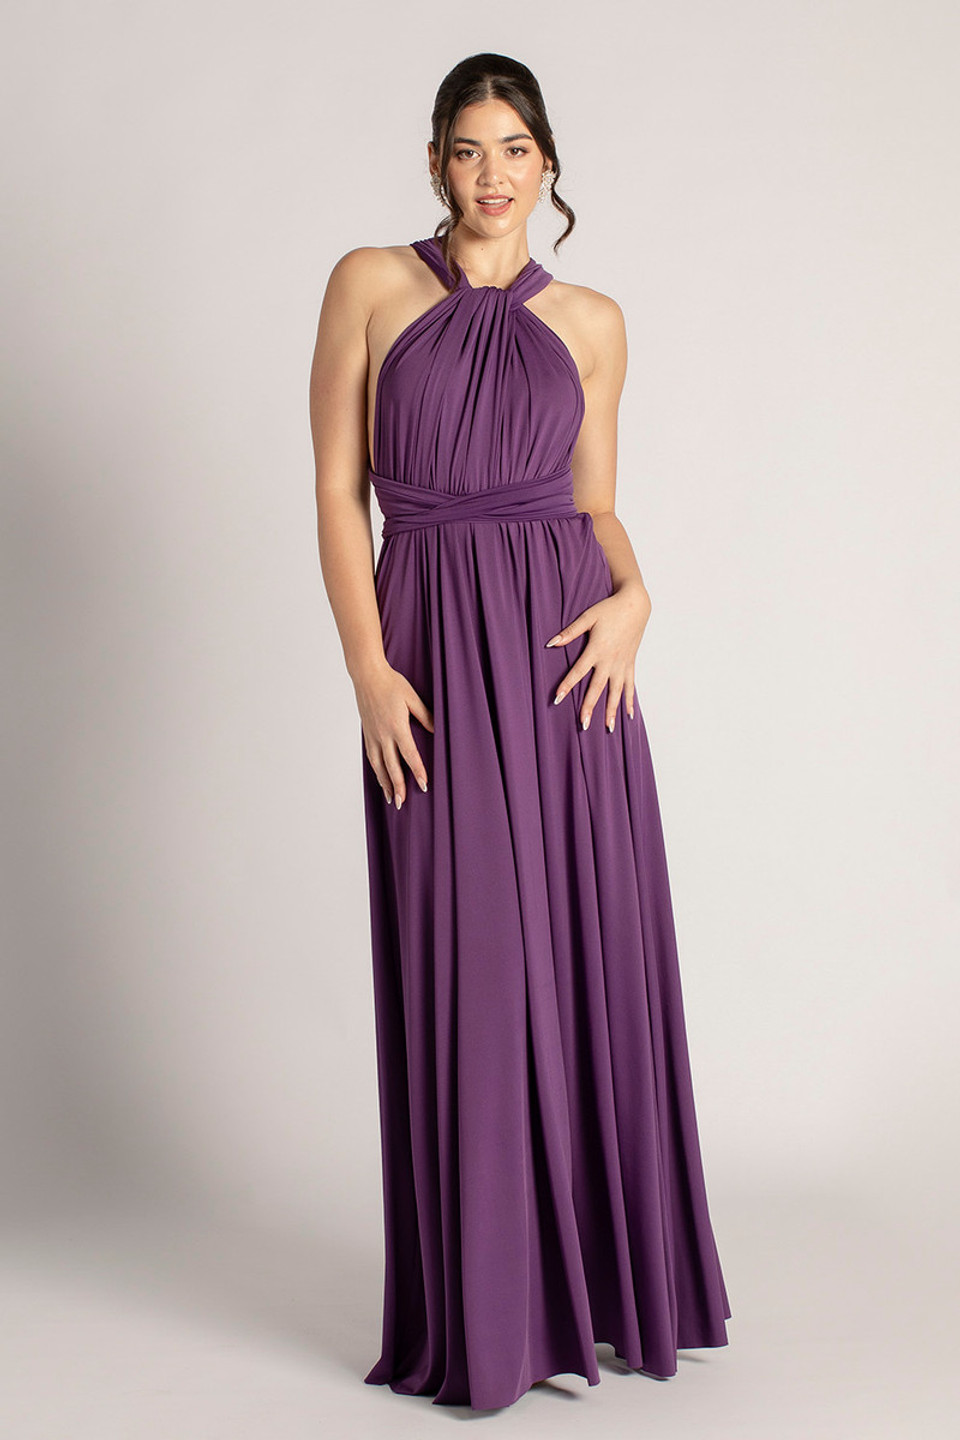 Classic Multiway Infinity Bridesmaid Dress In Dusty Purple - Formal ...